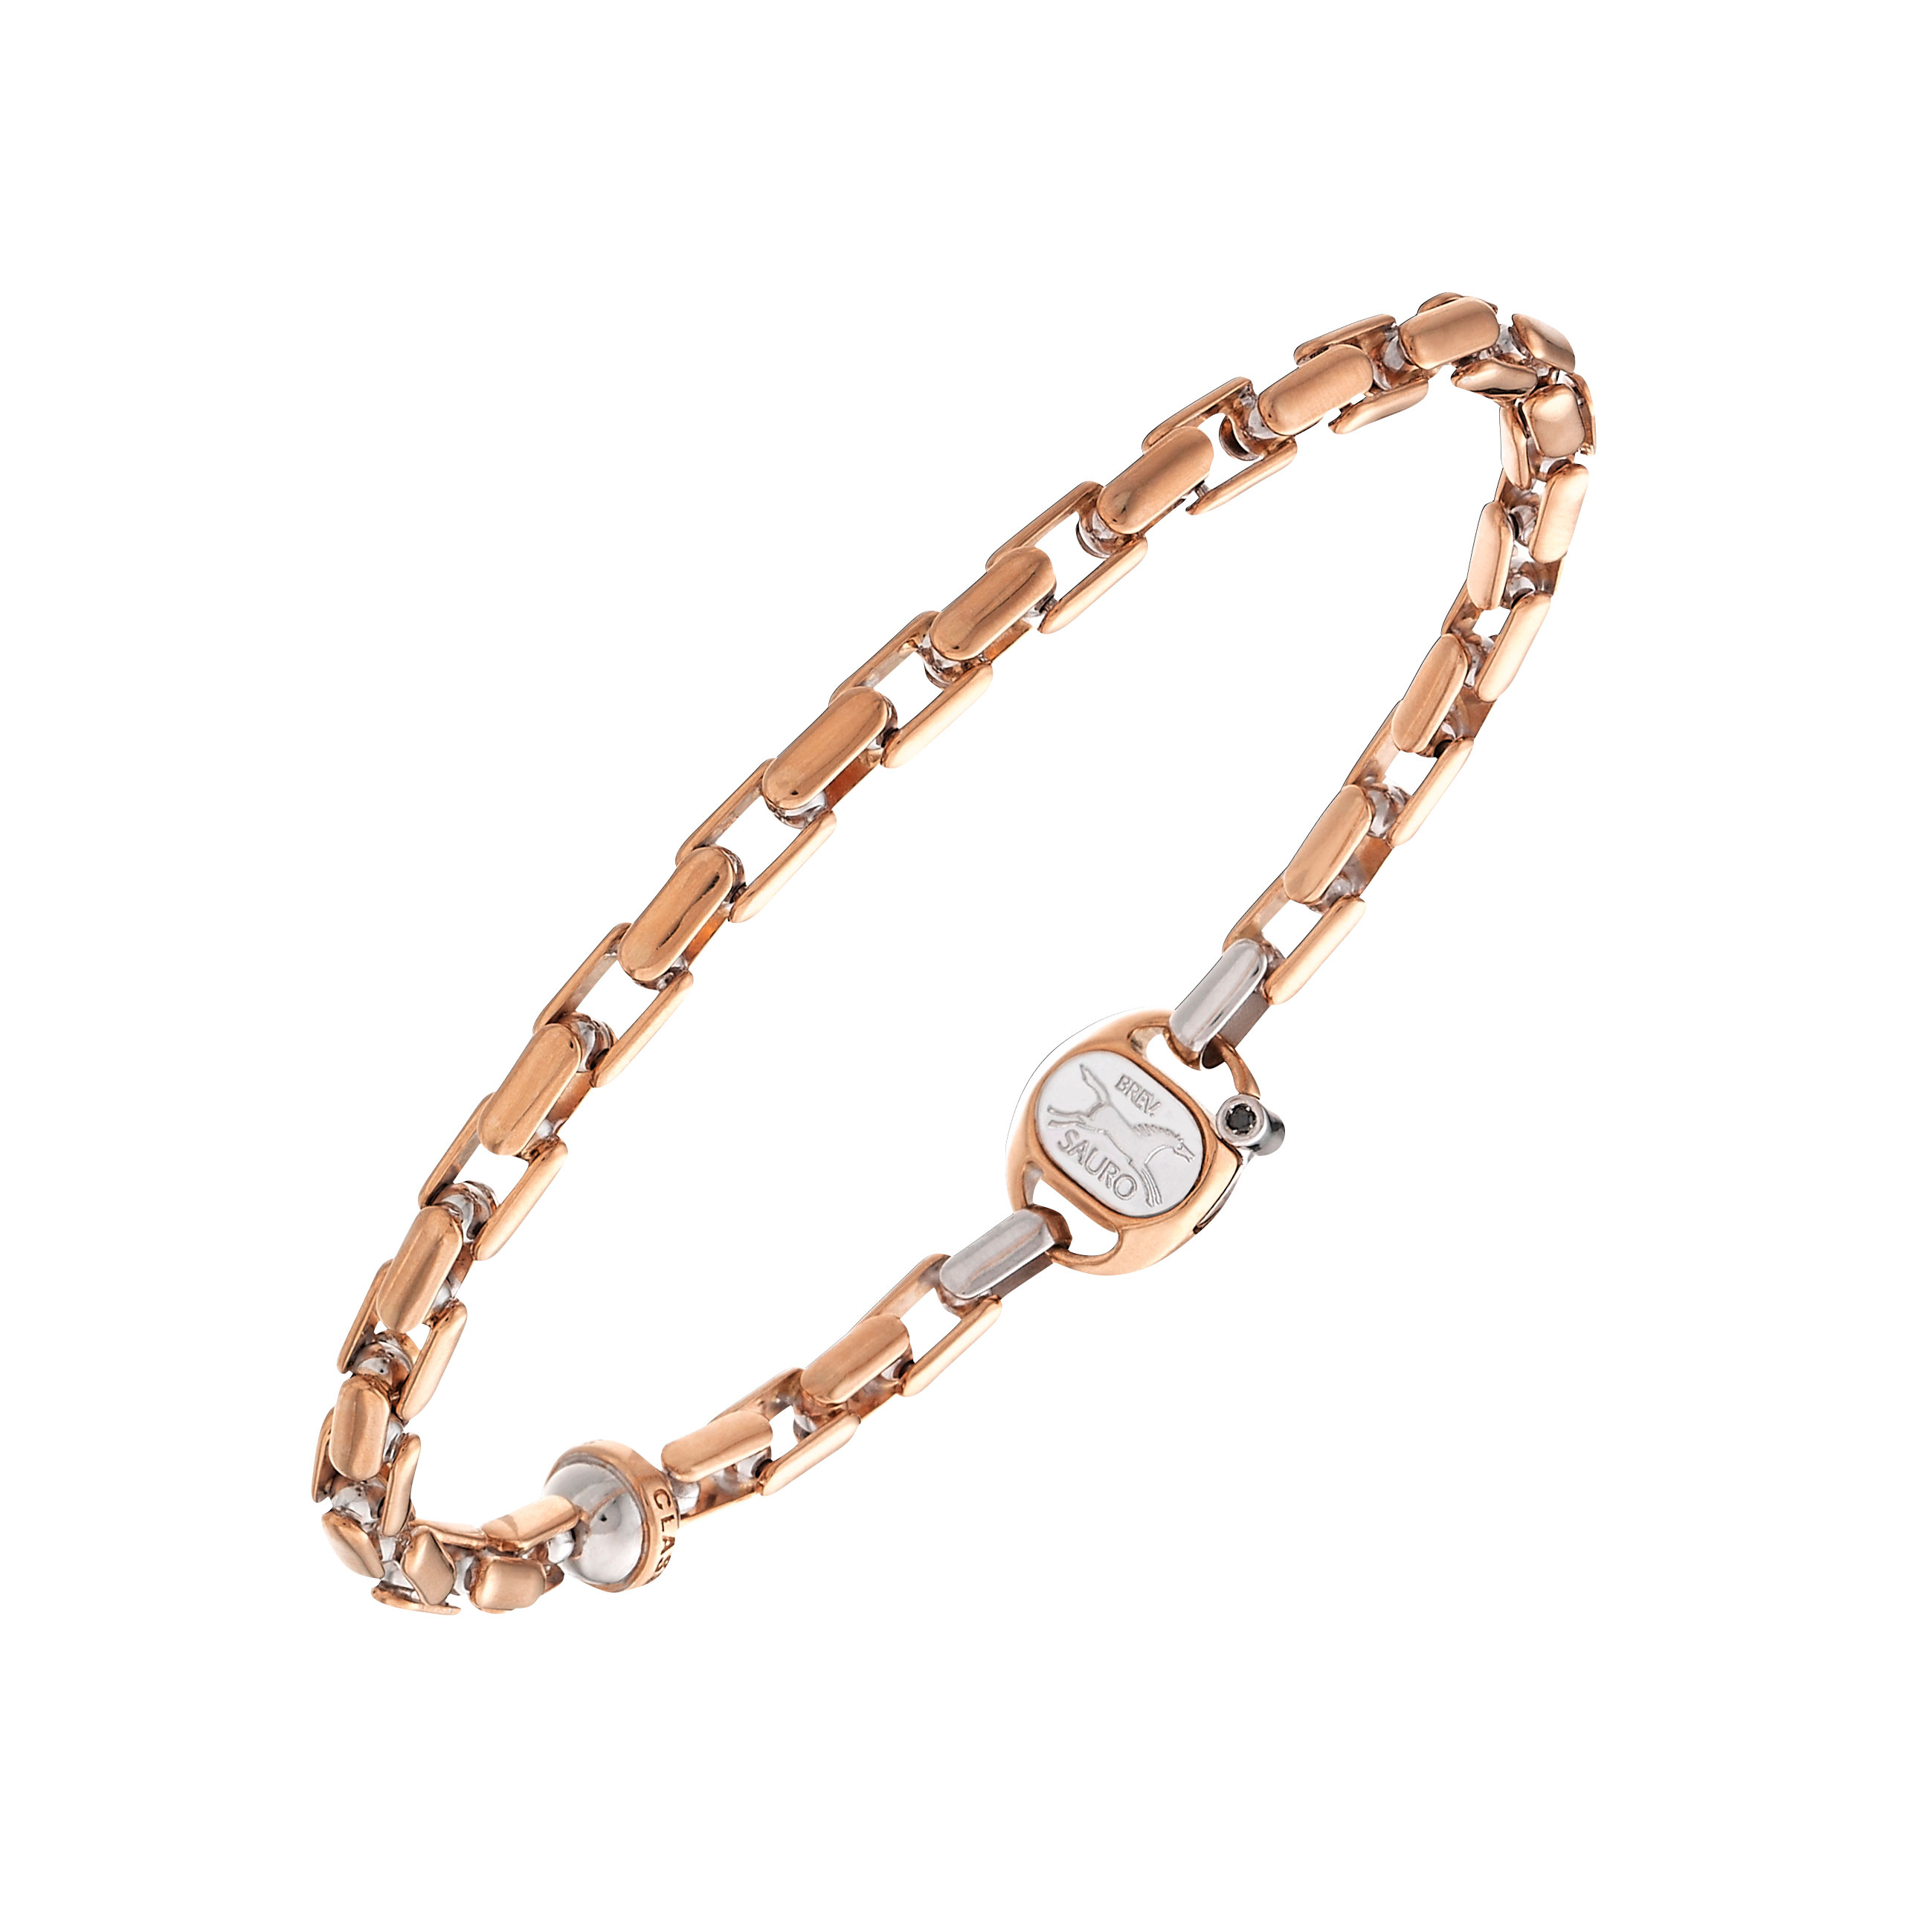 Buy Gold Plated Link Chain Bracelet for Men & Women at Low Price Buy Online